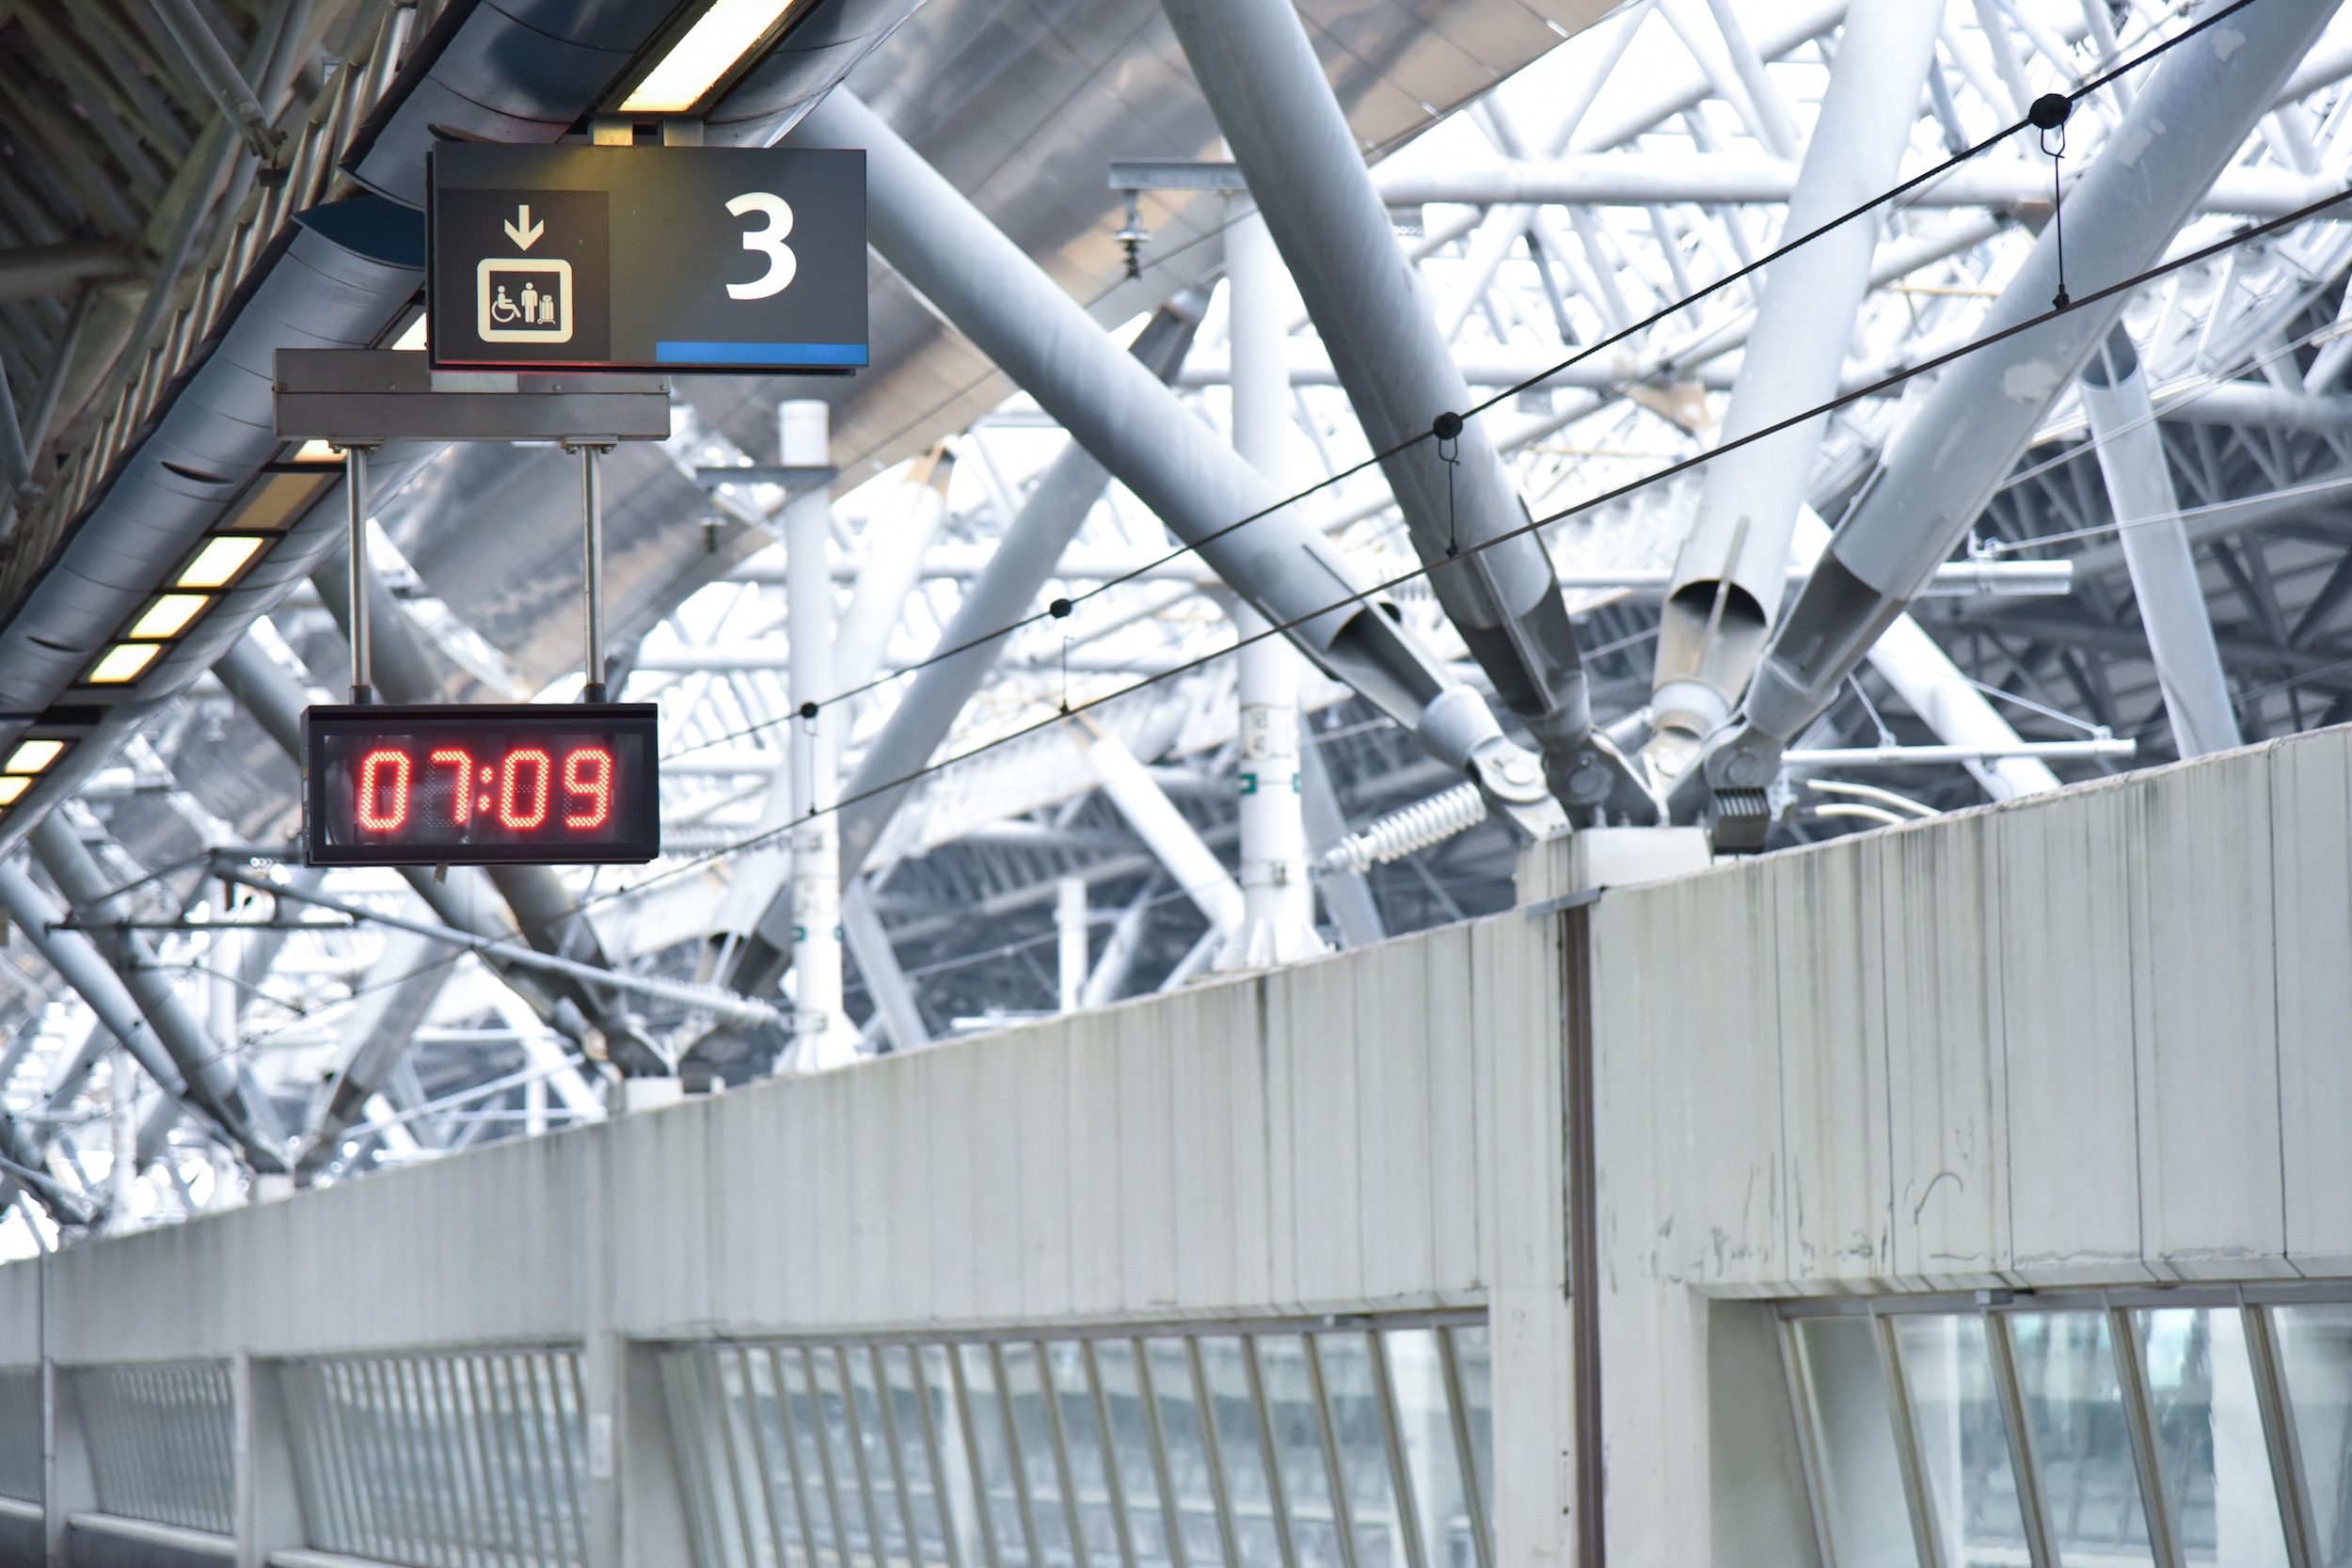 Digital clock displaying "07:09" in red print hanging from the ceiling in a white subway station.